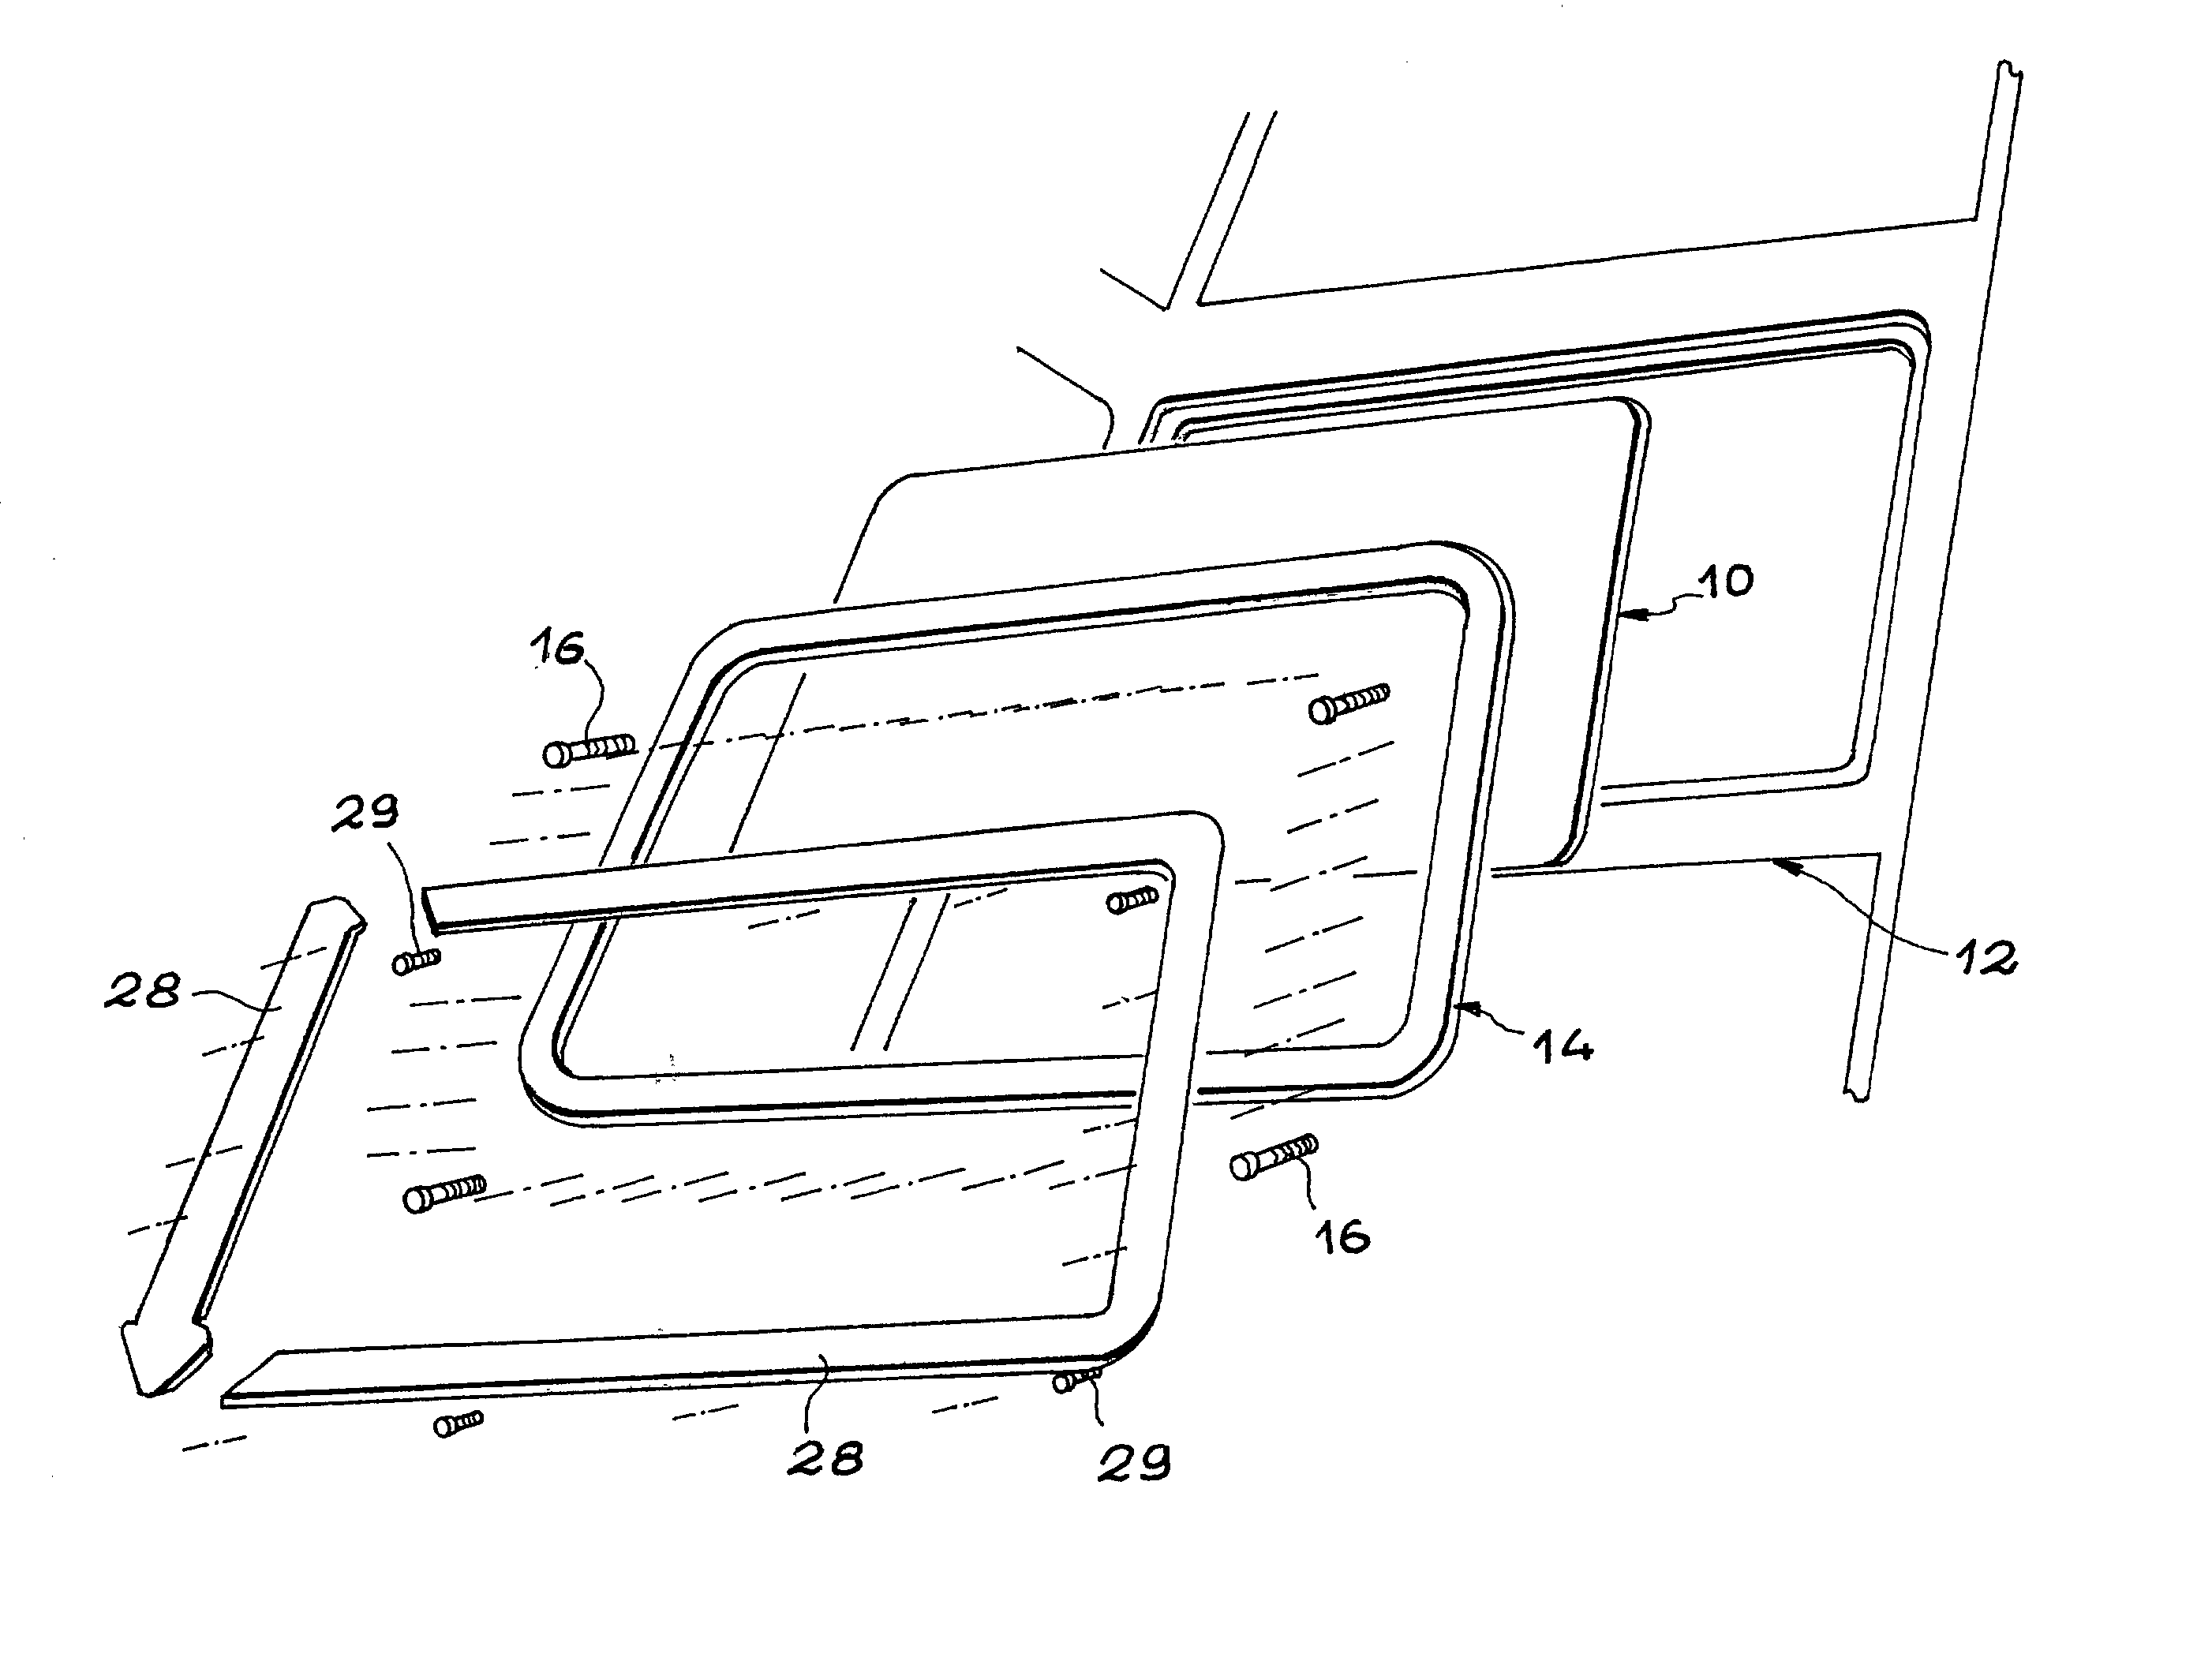 Aircraft windshield attachment device